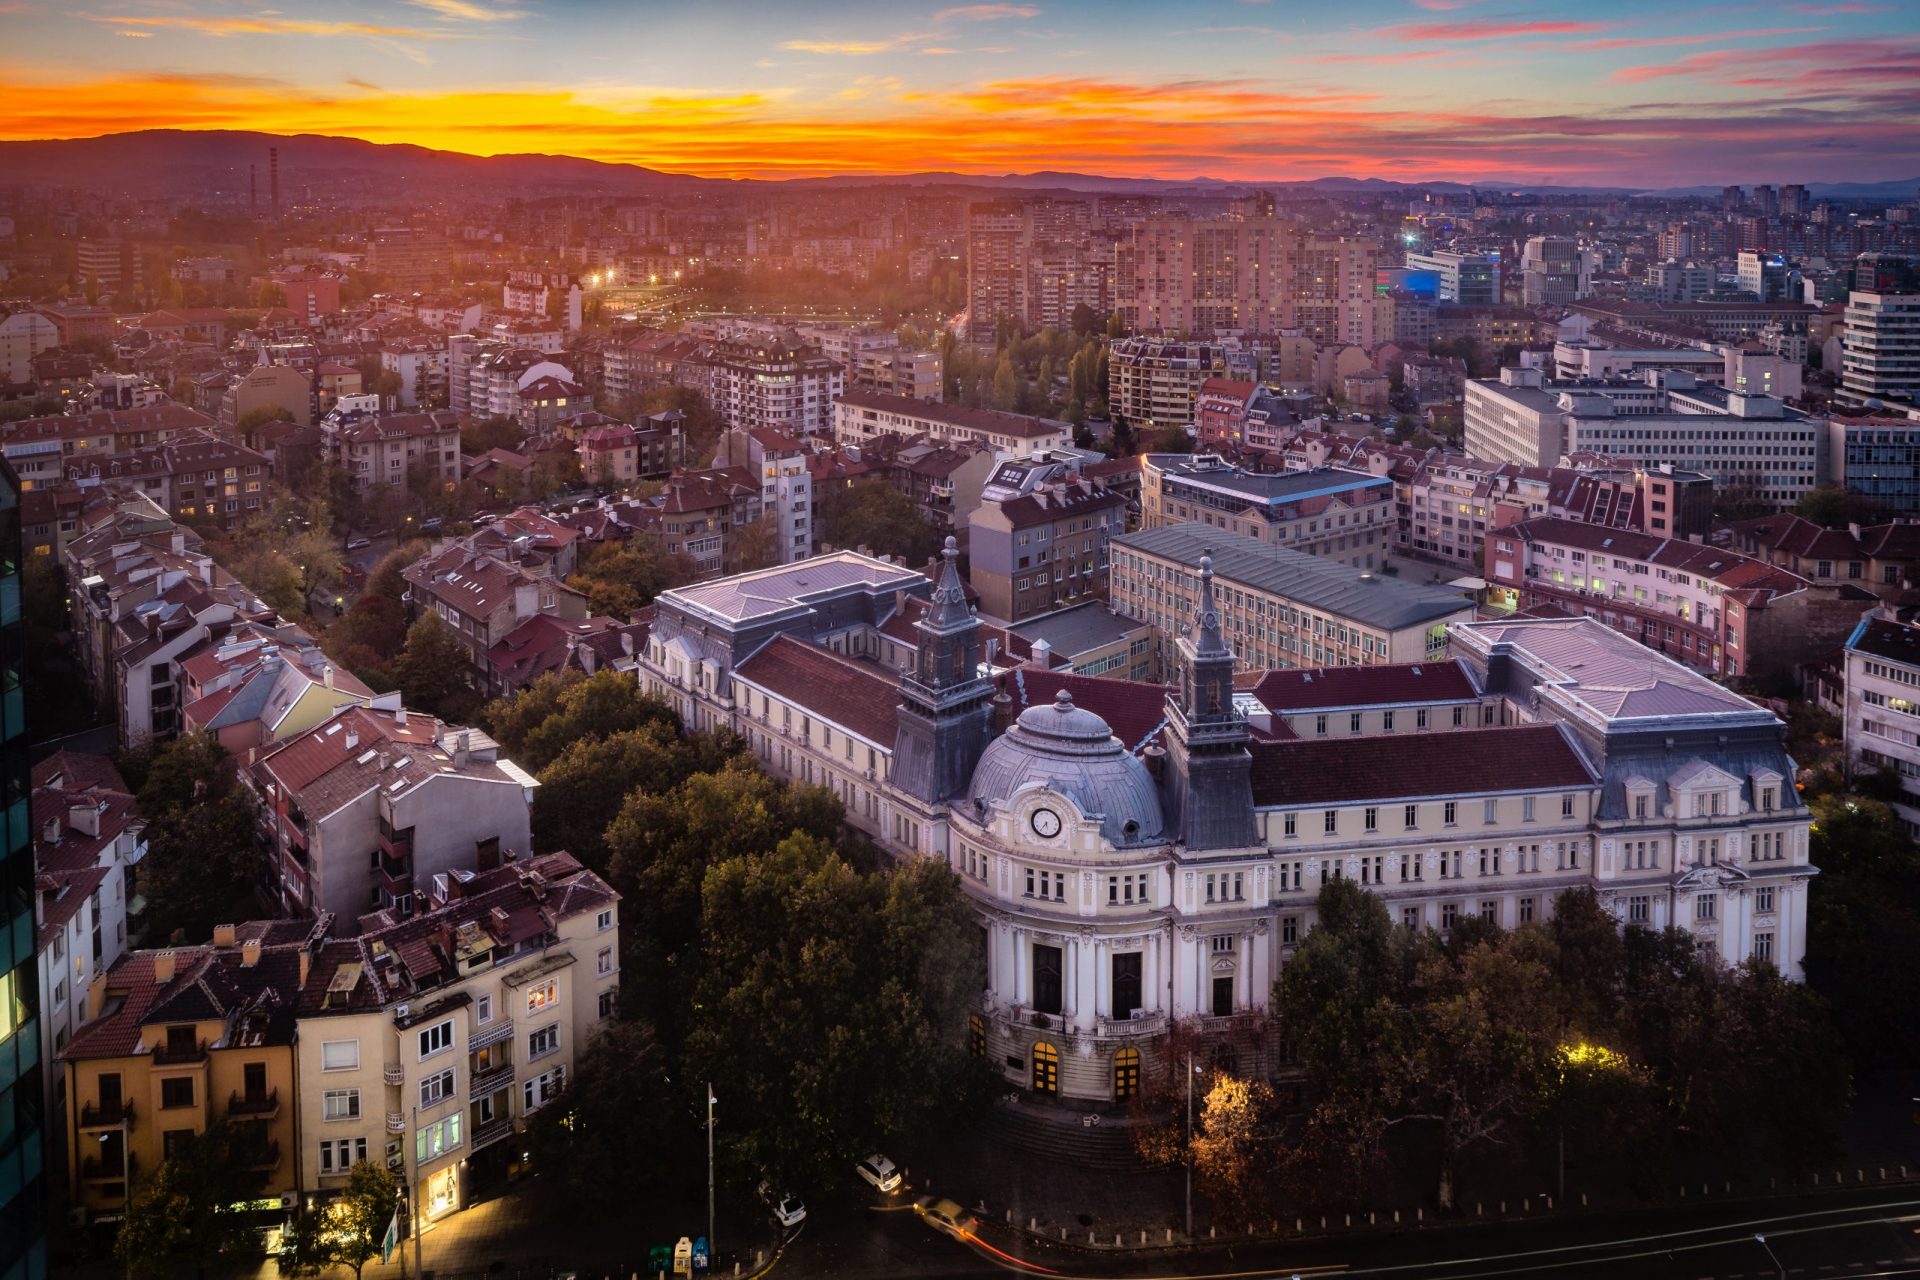 <p>Welcome to one of the oldest cities in Europe! The capital of Bulgaria, Sofia is filled with history and culture. Visit its city center to observe its neo-classical buildings with communist structures, its Soviet-era statues, its domed churches, and its grand galleries.</p>